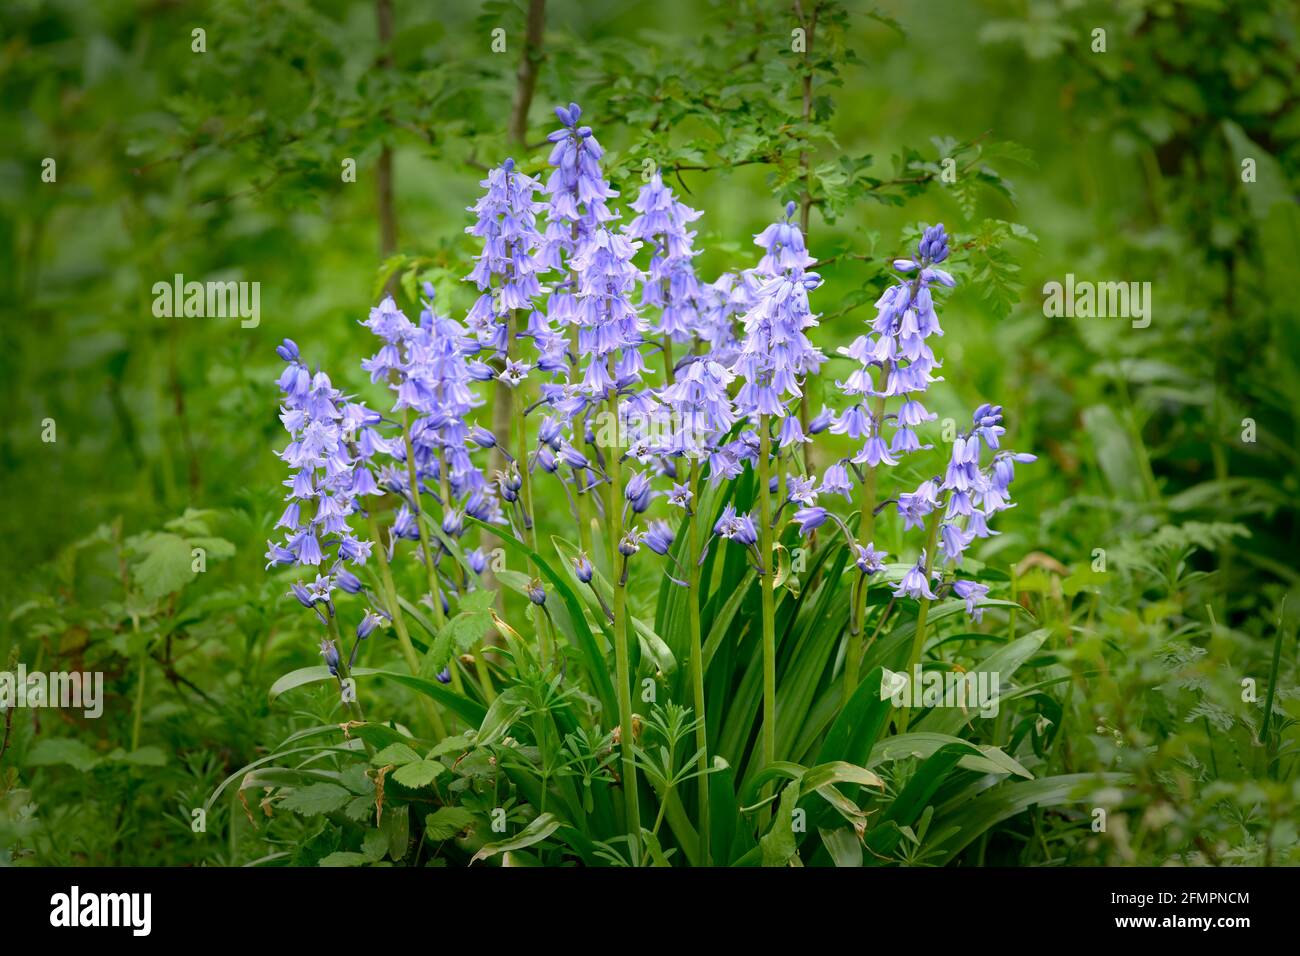 A clump of Bluebell flowers against a green foliage background Stock Photo